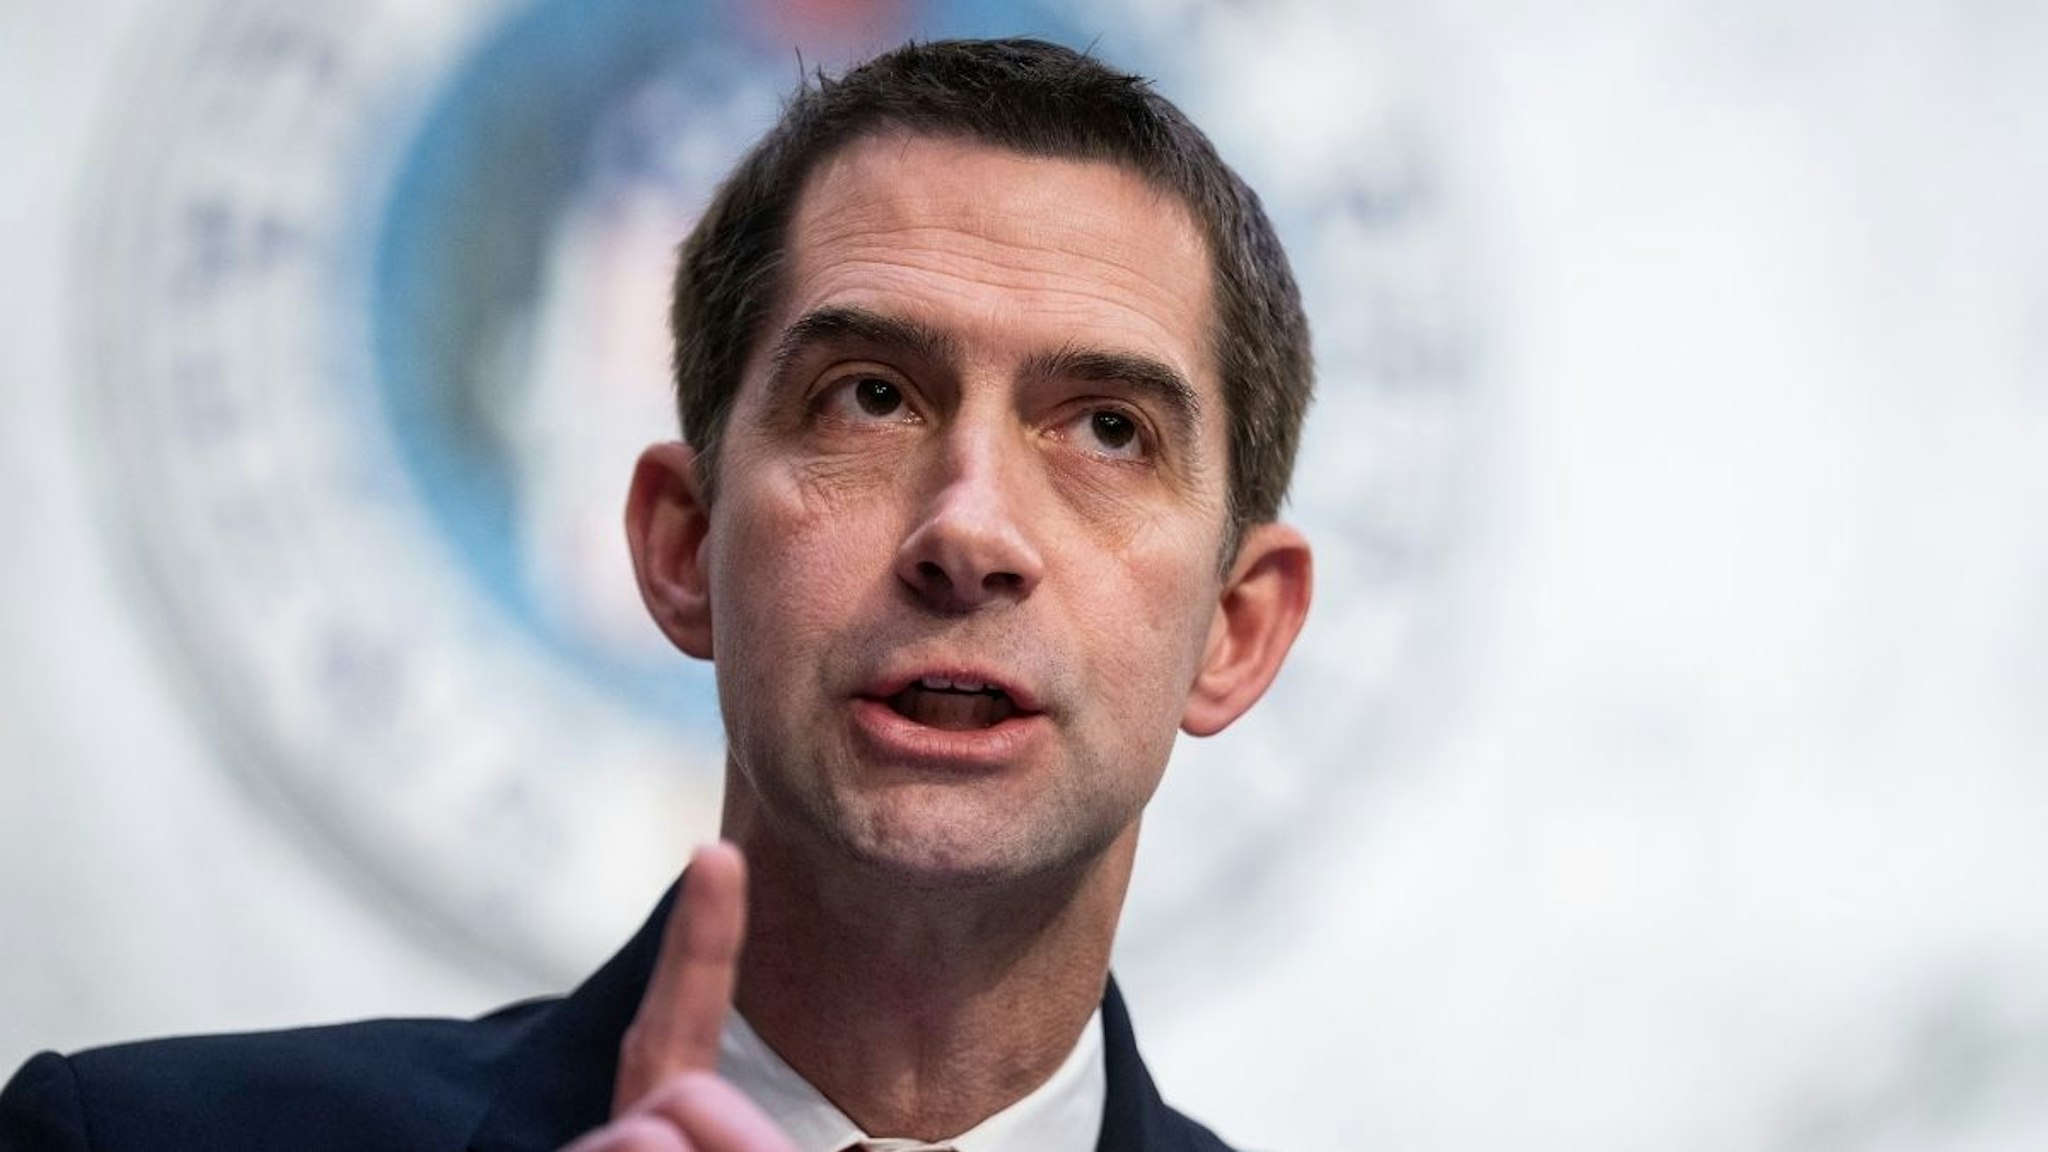 Sen. Tom Cotton, R-Ark., speaks during the Senate Judiciary Committee markup on the nomination of Ketanji Brown Jackson to be an associate justice of the Supreme Court, in Hart Building on Monday, April 4, 2022.